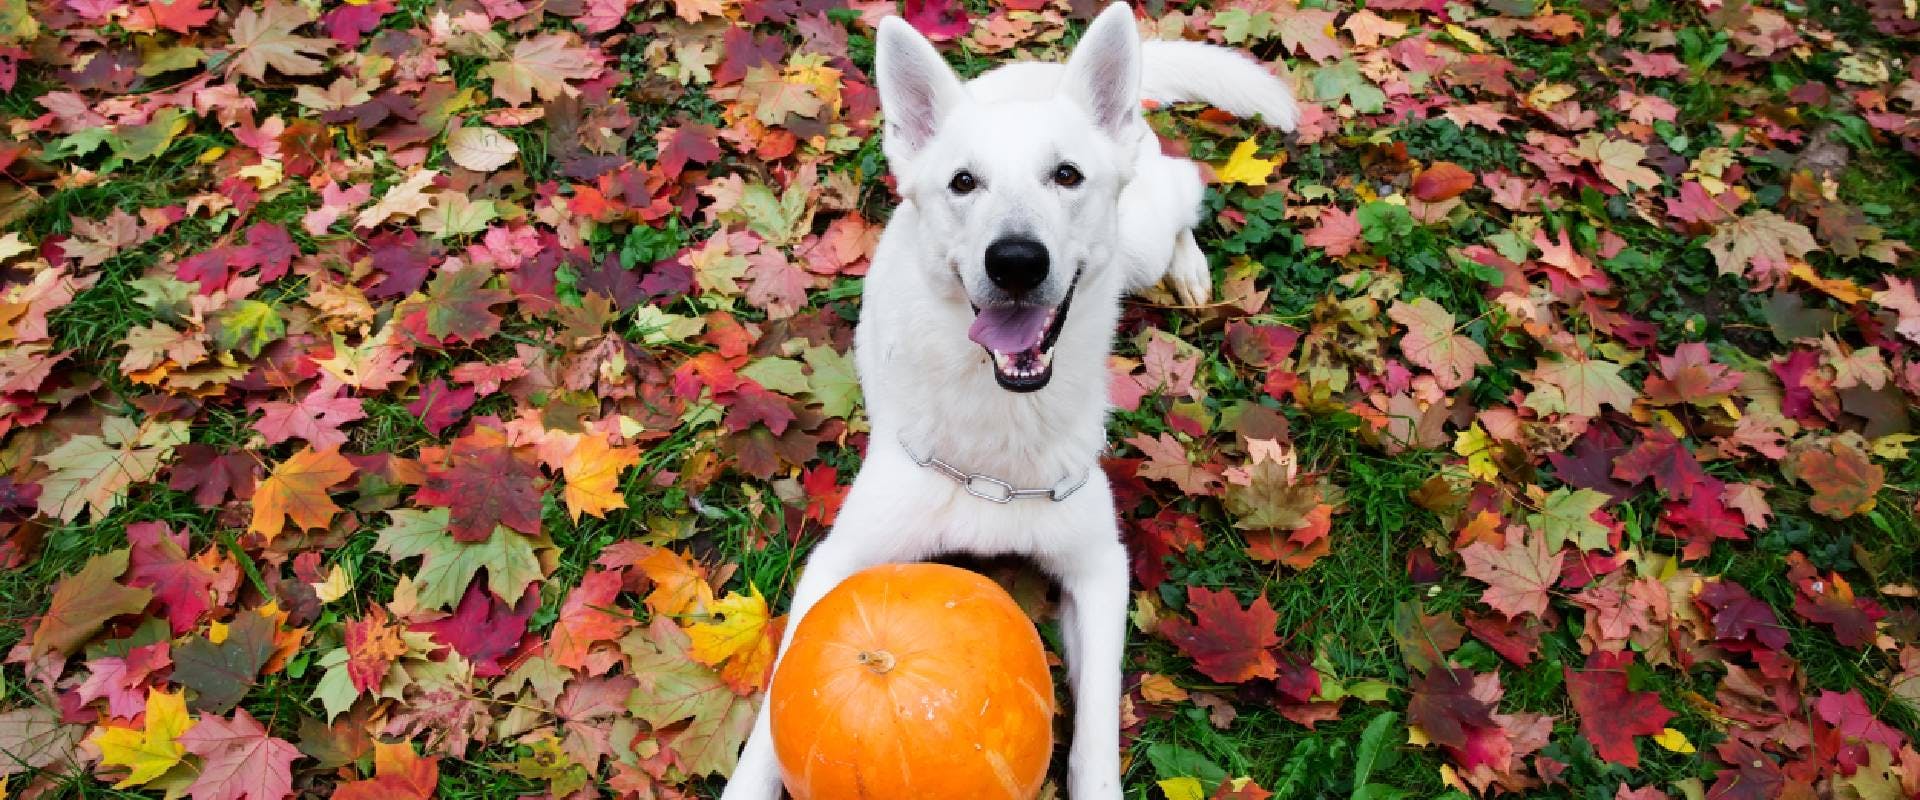 White dog laying next to a pumpkin on an autumn day